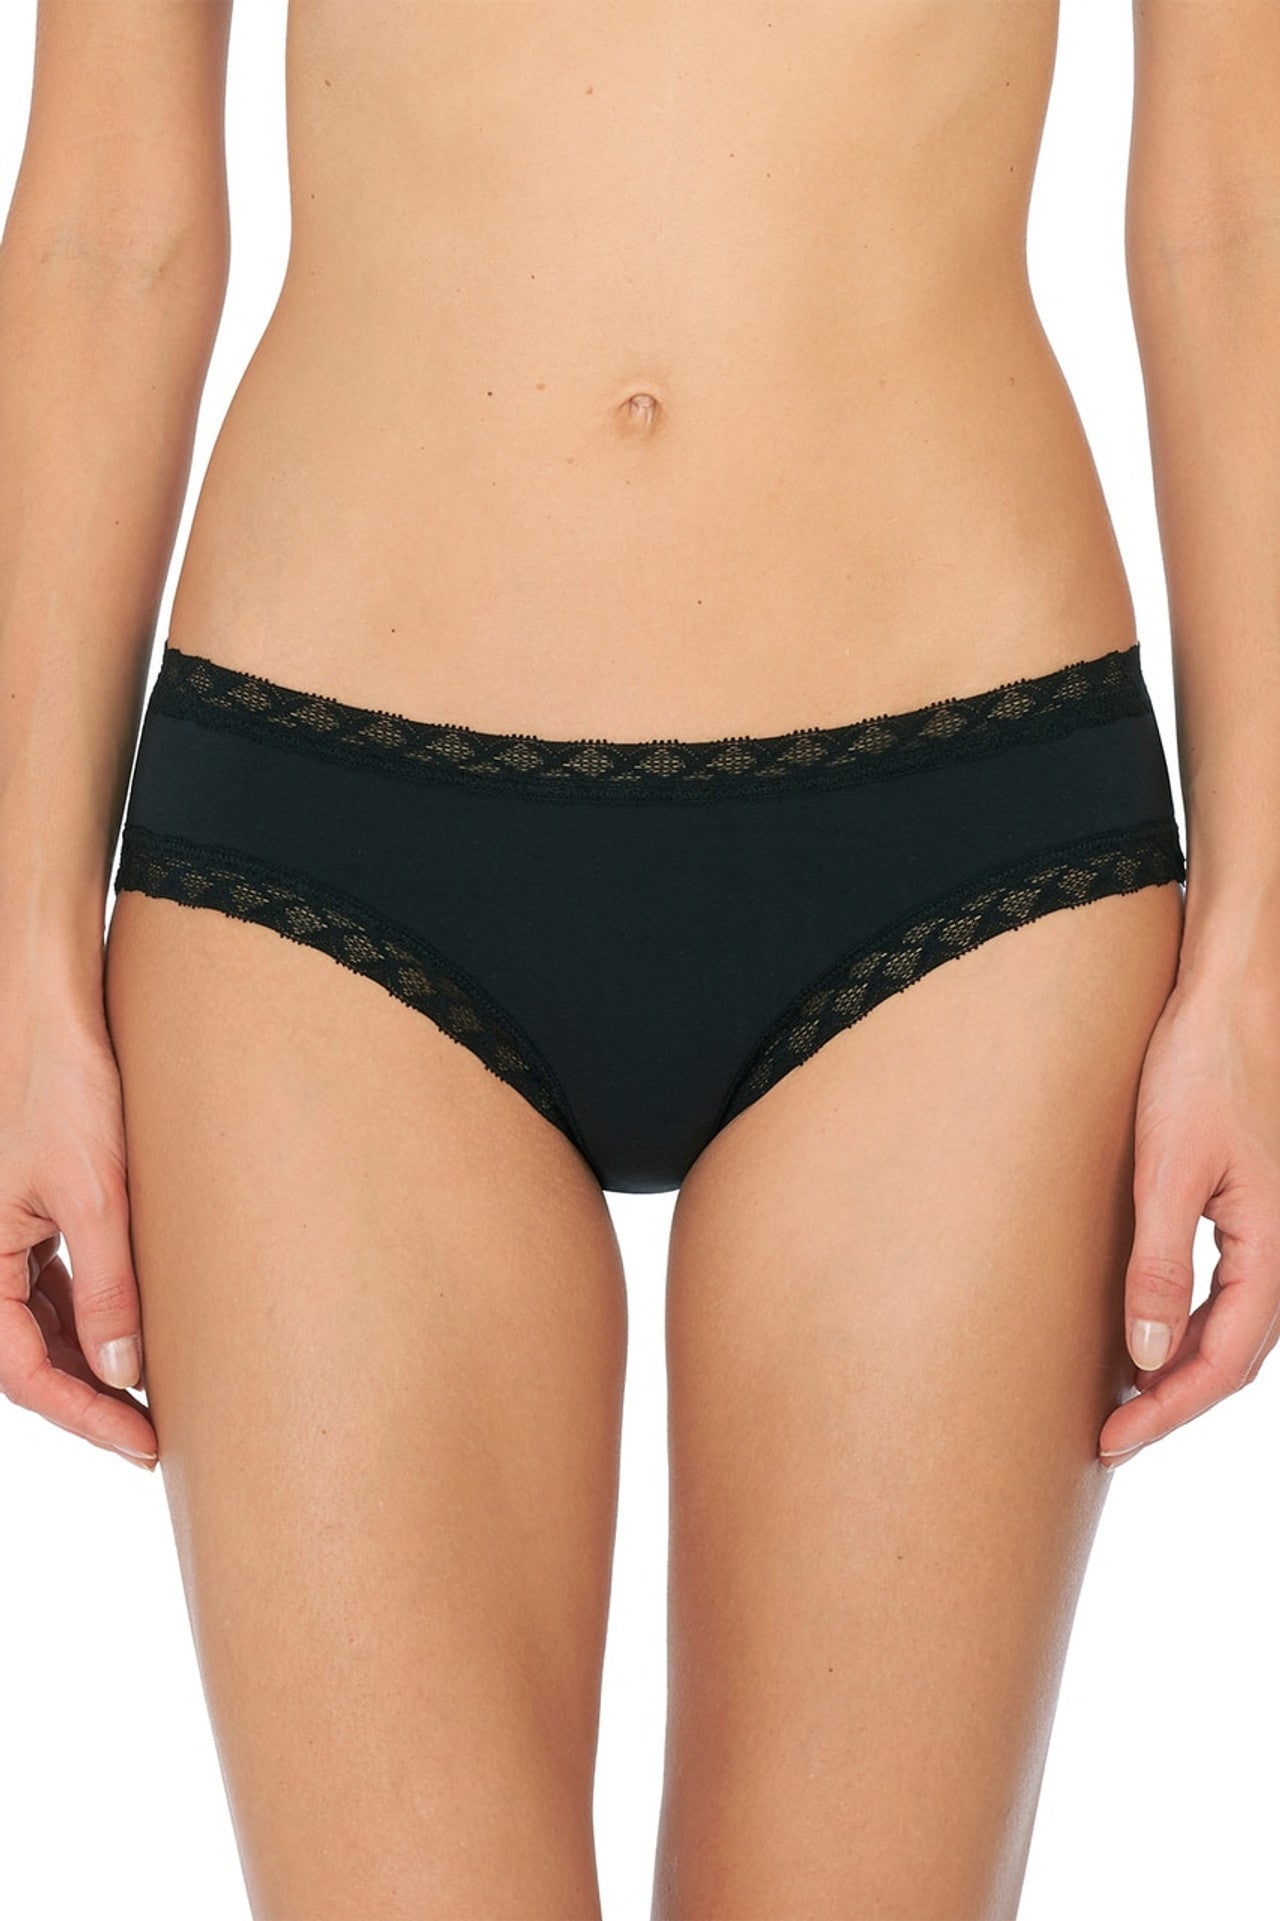 Model wearing Bliss Girl Brief In Black - Natori, front view in close up of the panty